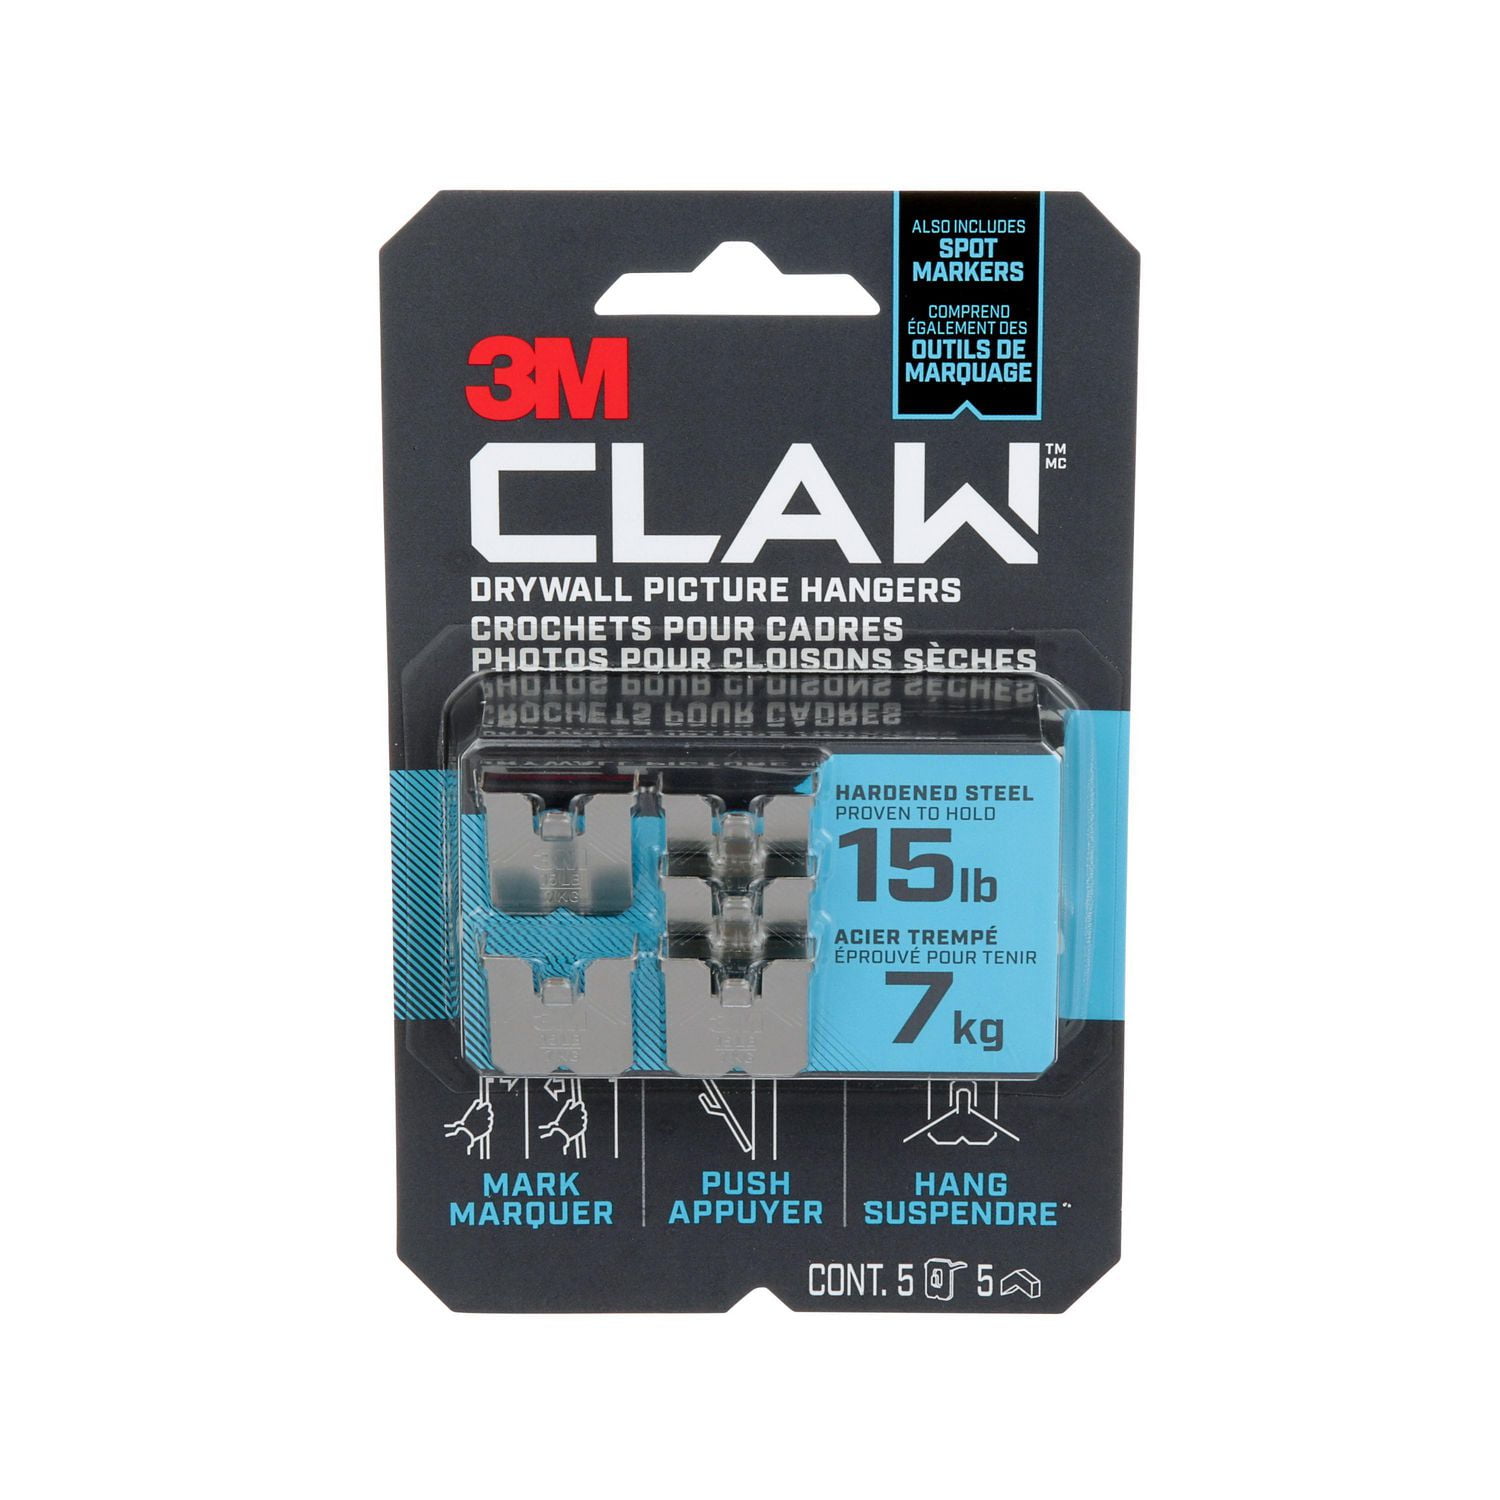 3M™ CLAW Drywall Picture Hanger with Temporary Spot Marker 3PH15M